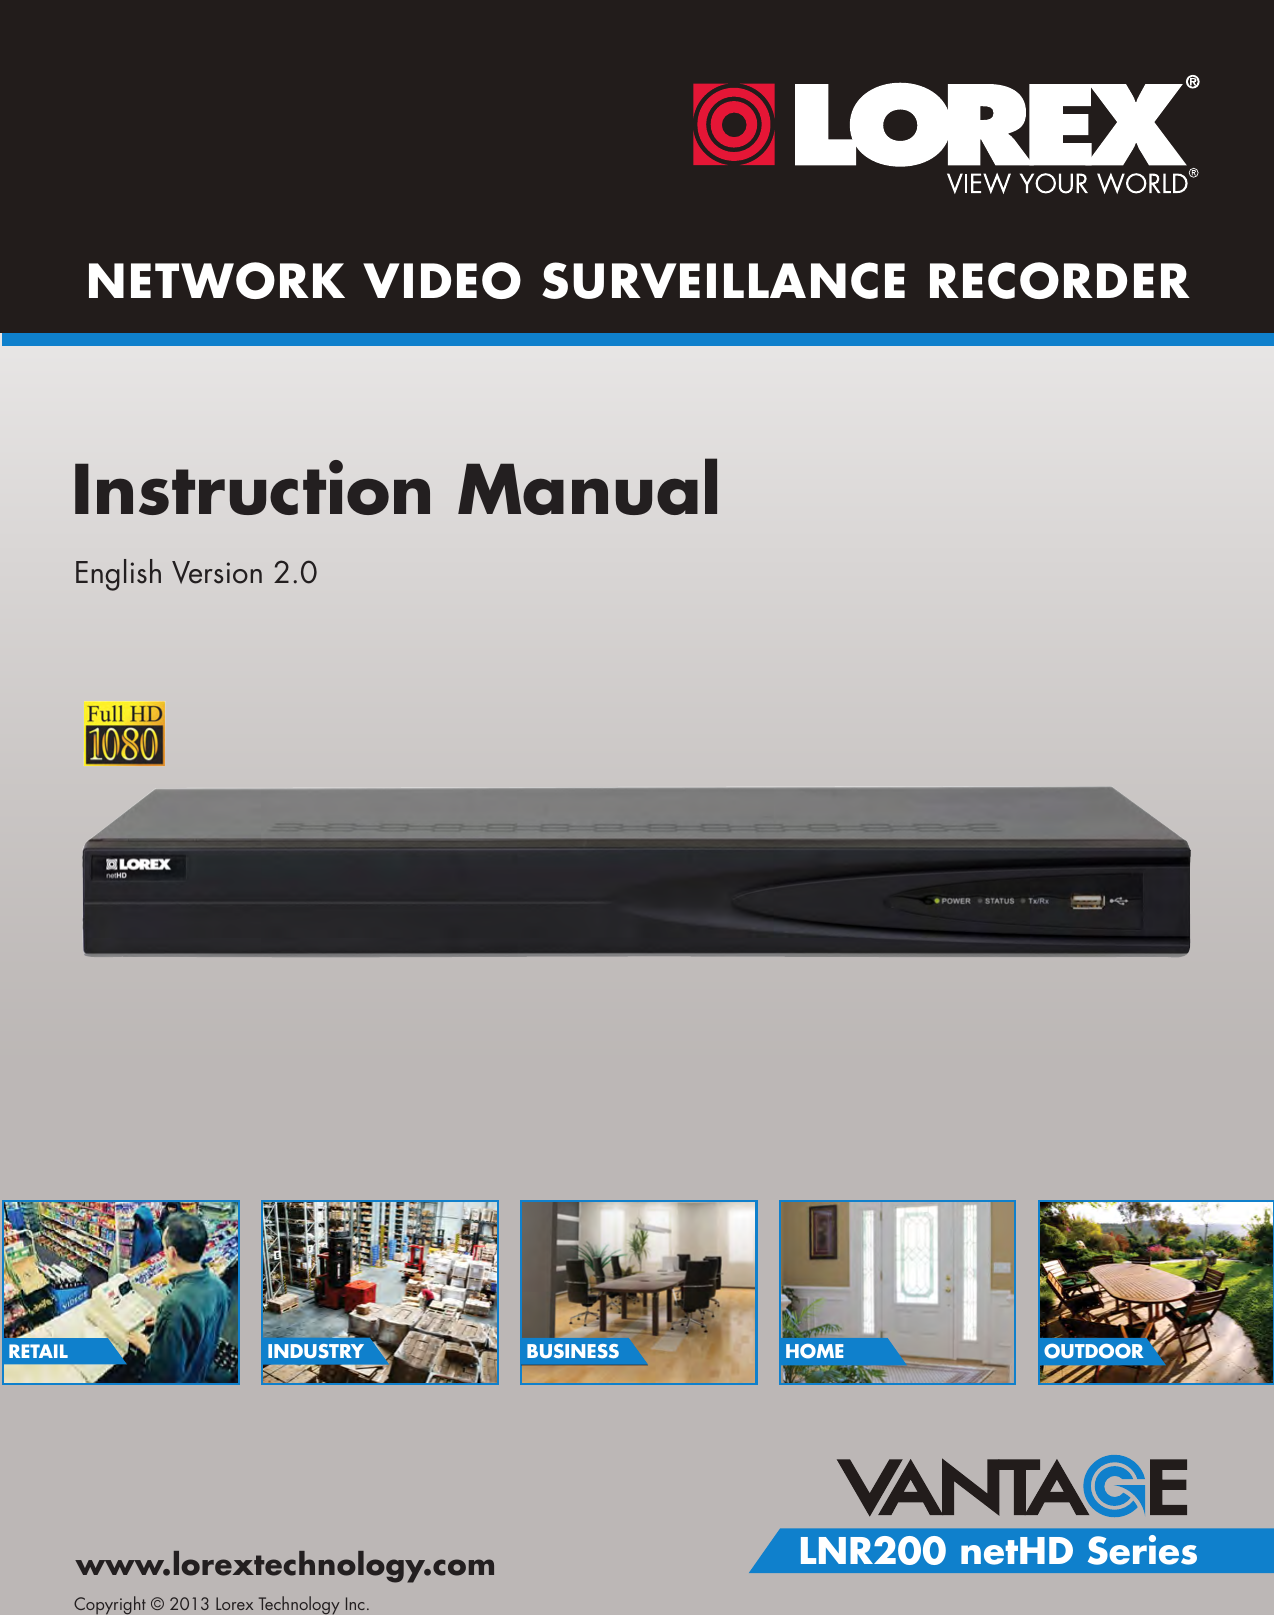 Lorex Ip Security Camera System With 1080p Cameras Owners Manual Lnr0 Nethd Series Network Video Surveillance Recorder